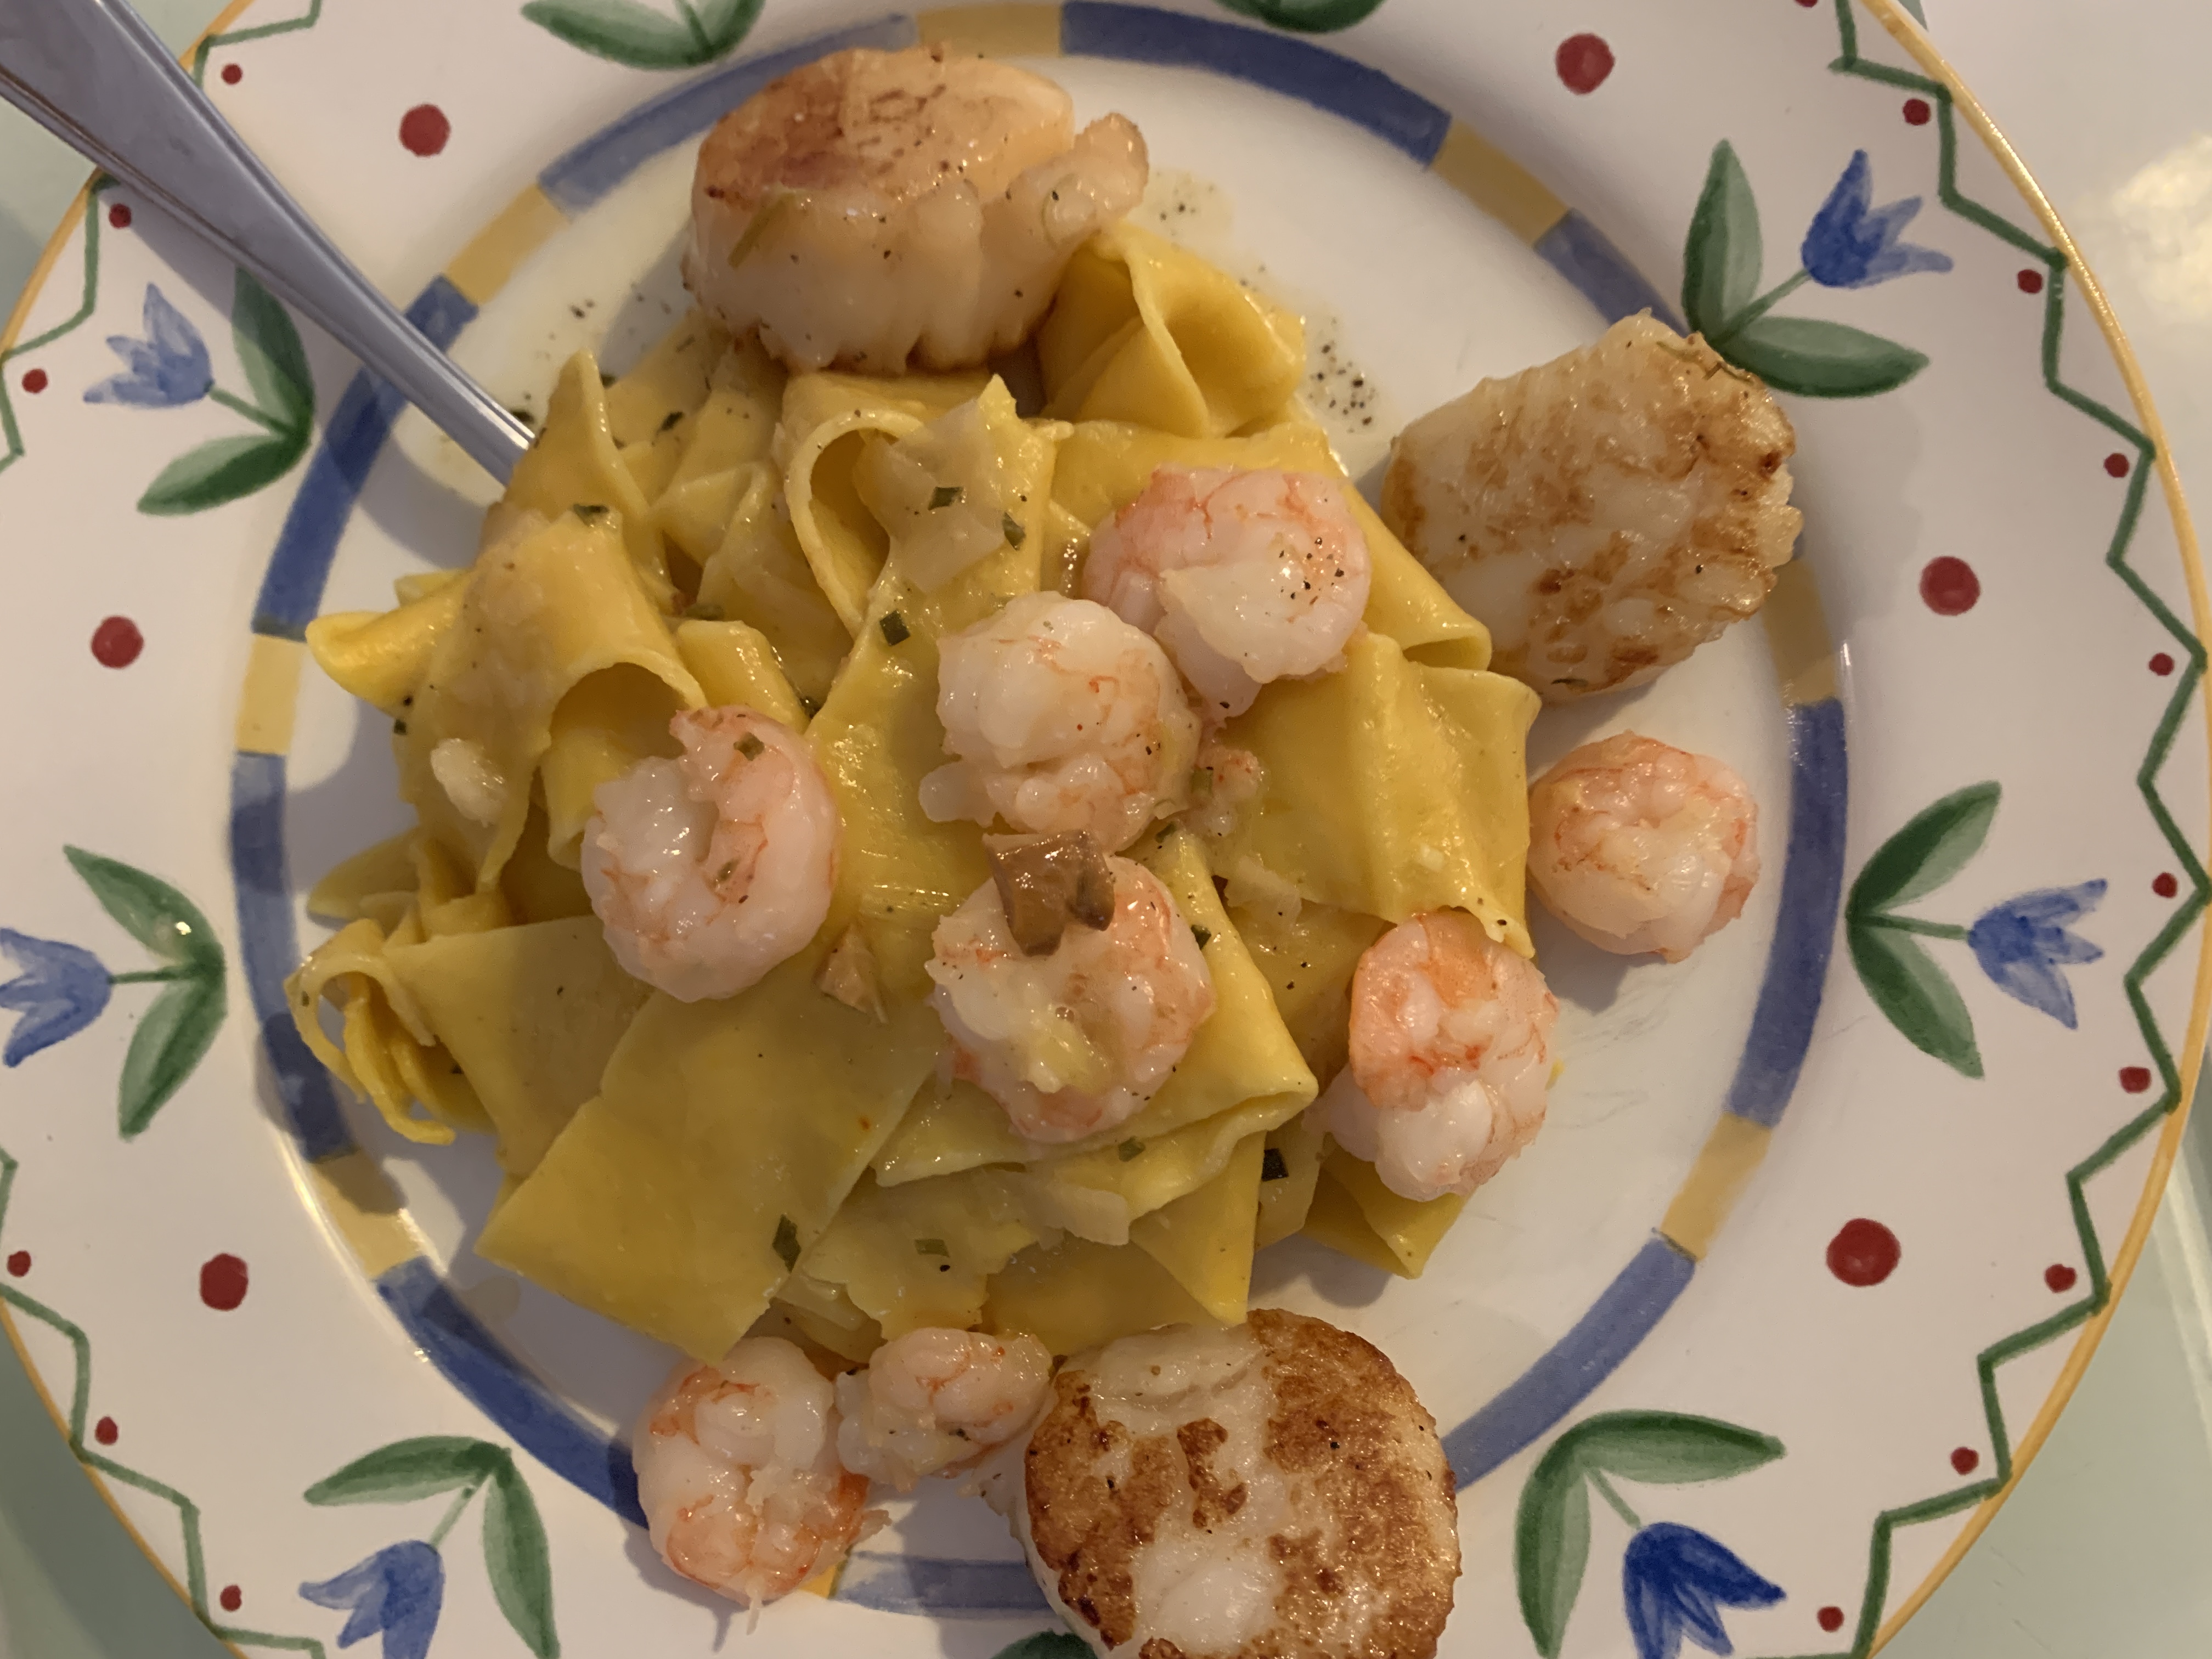 Plate of pasta with shrimp and scallops